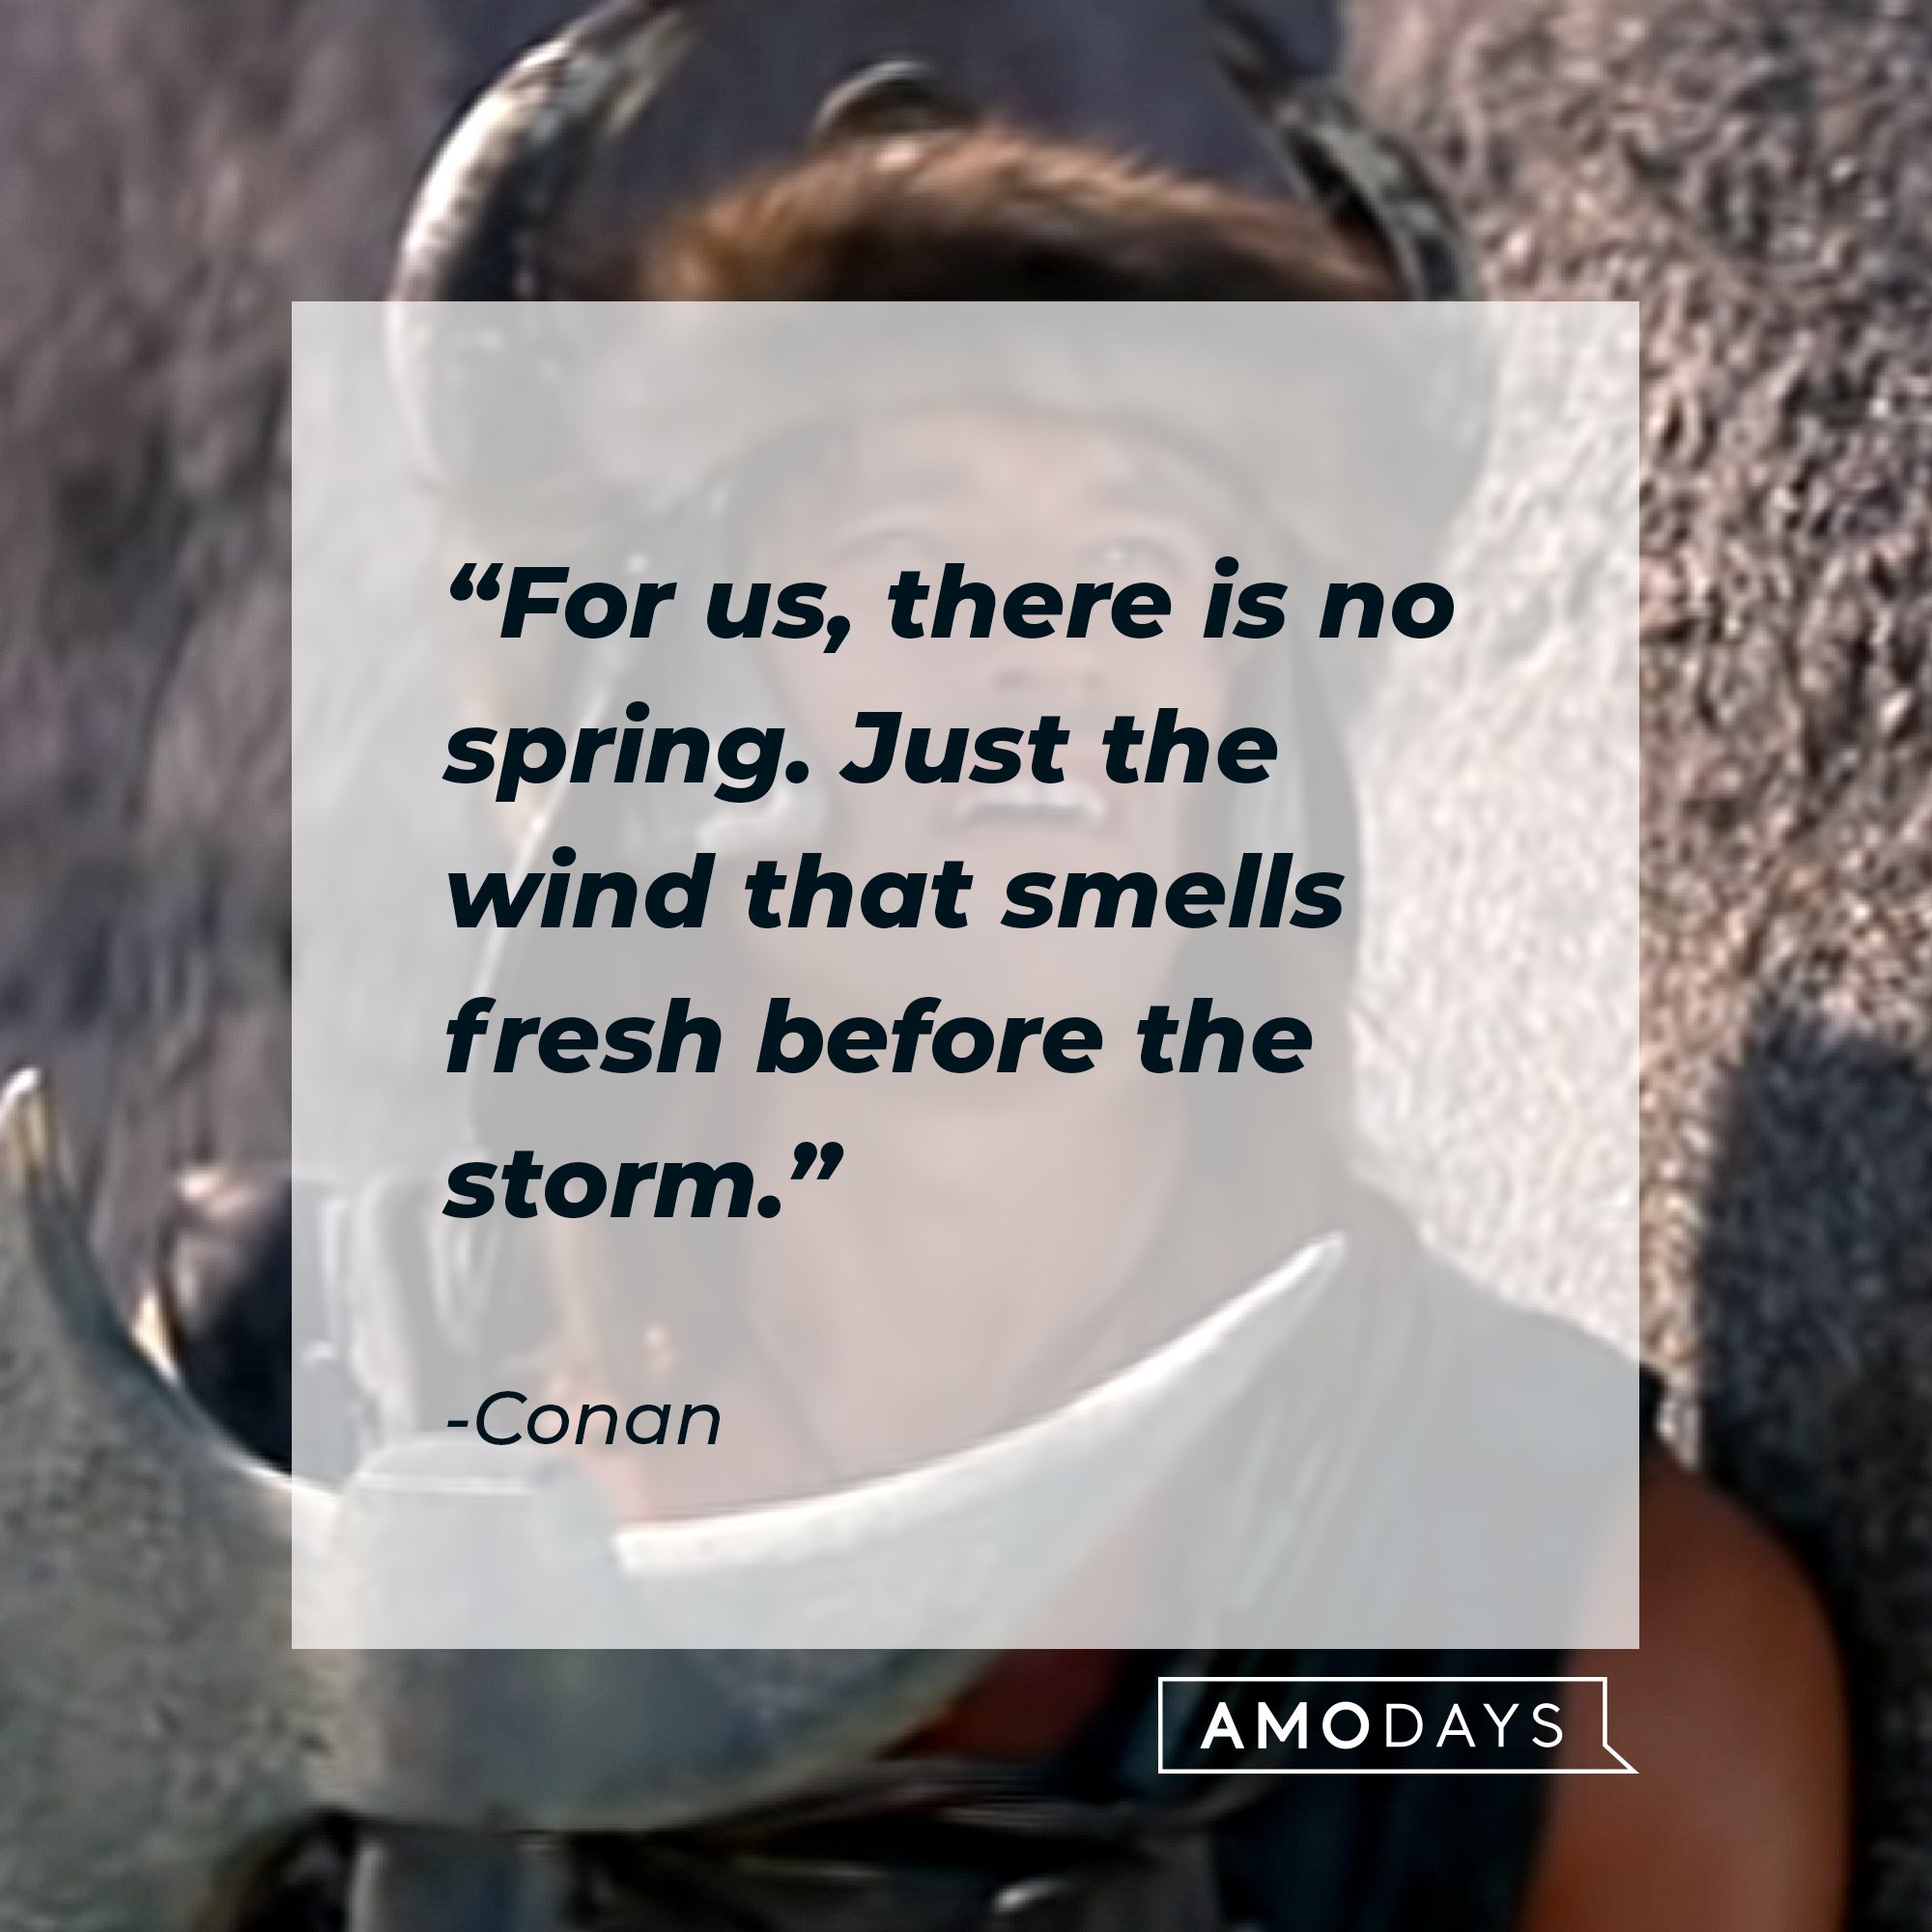 Conan's quote: "For us, there is no spring. Just the wind that smells fresh before the storm." | Image: AmoDays